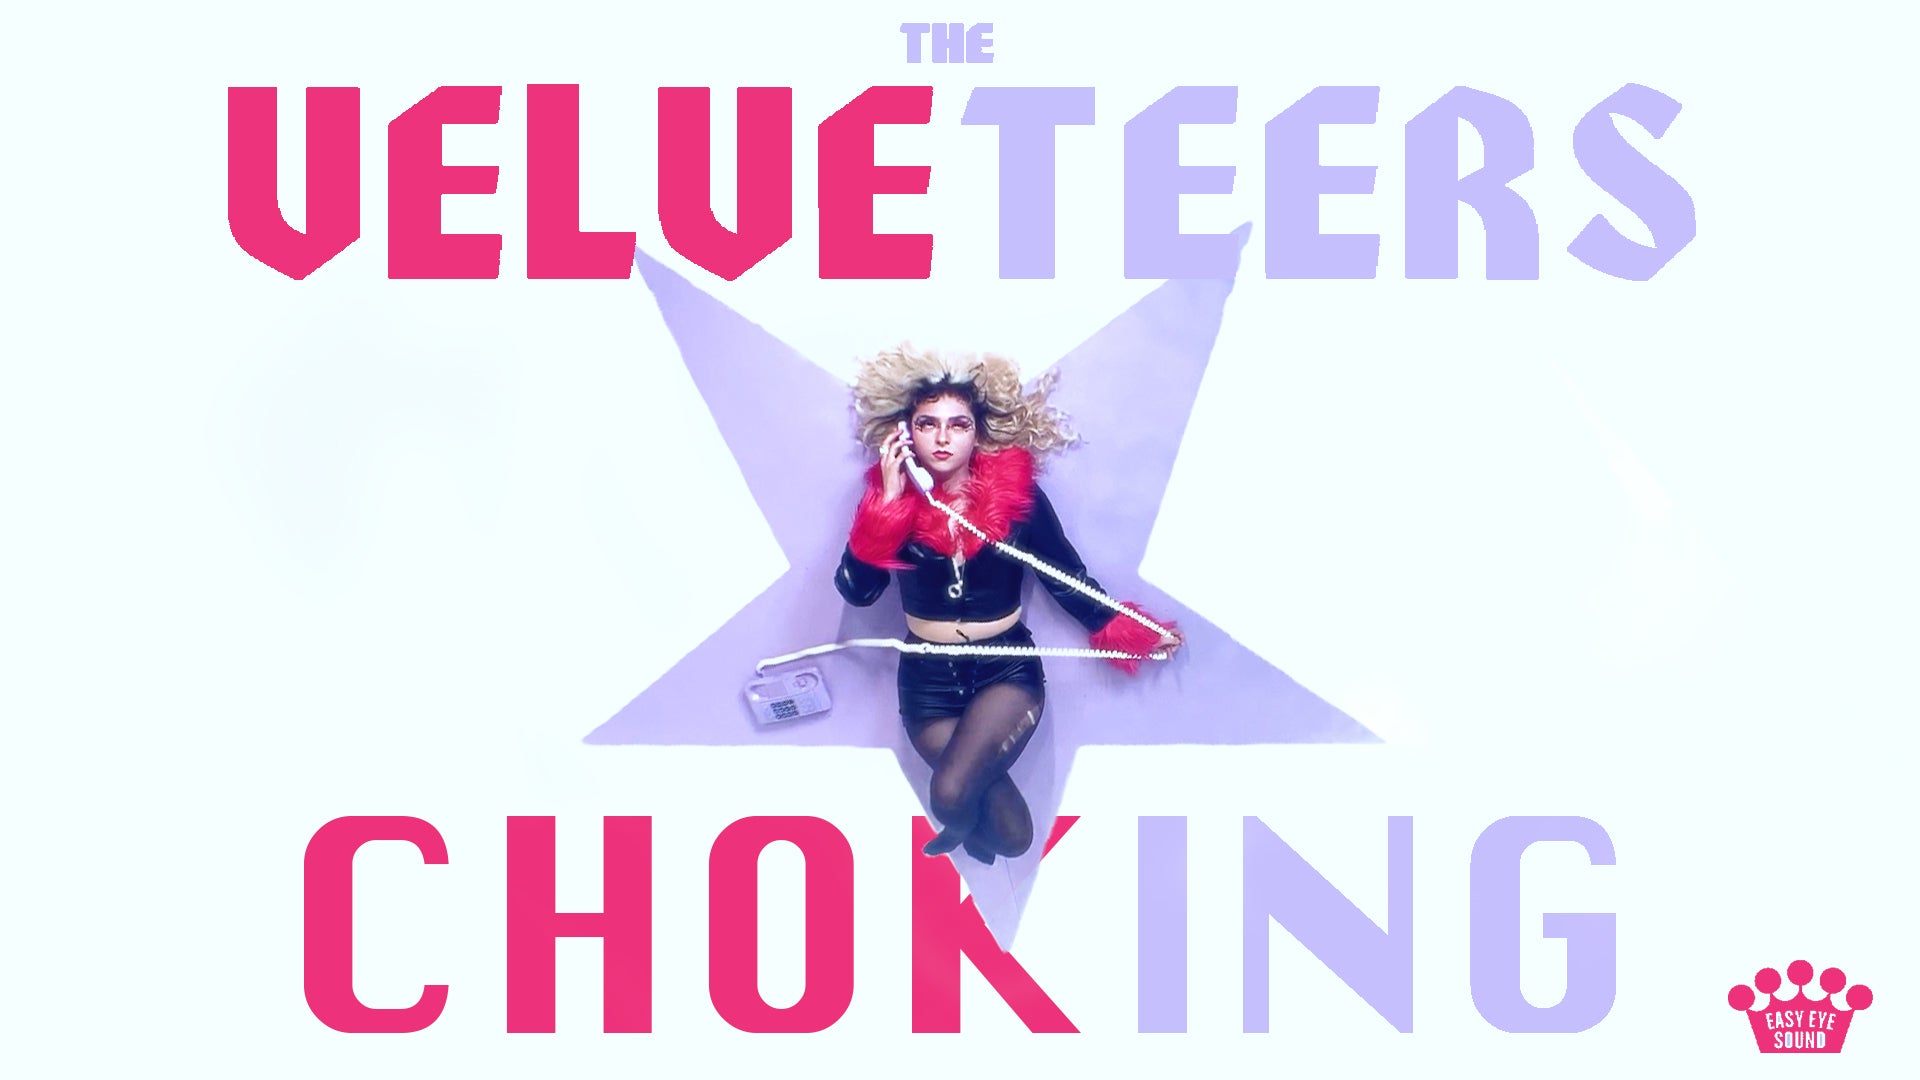 THE VELVETEERS RELEASE NEW MUSIC VIDEO FOR “CHOKING”